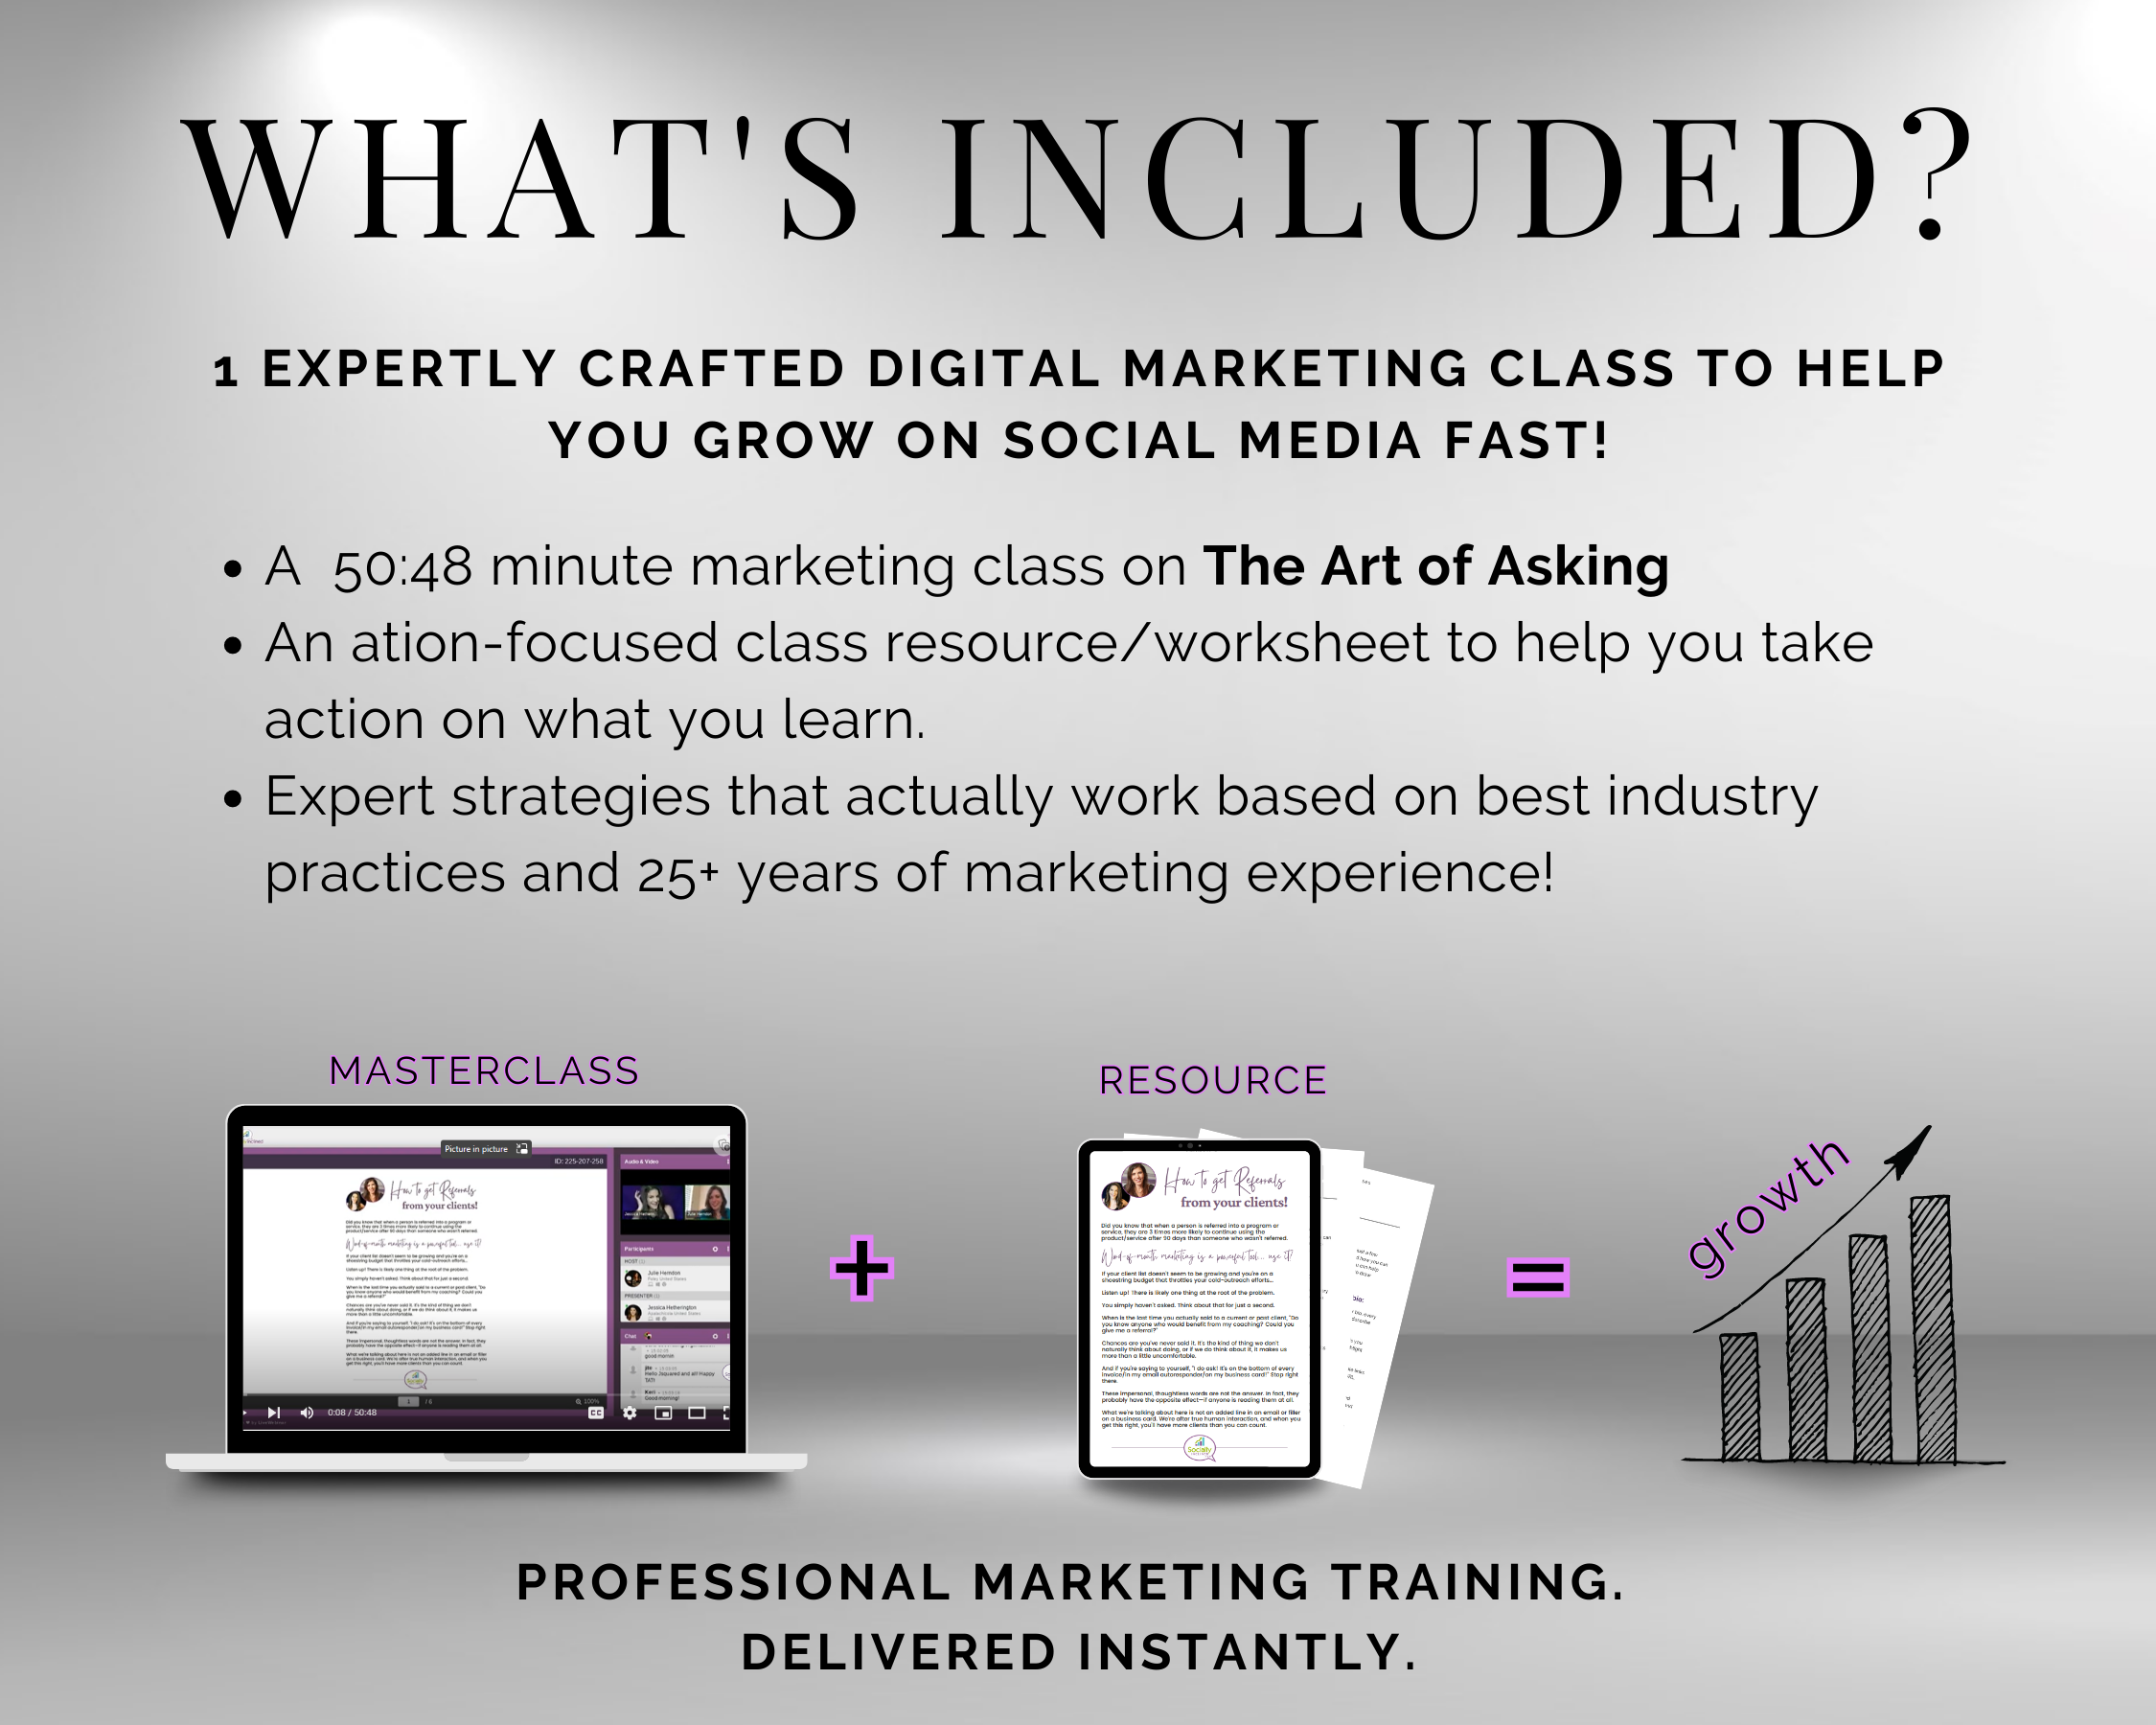 What's included in the TAT - The Art of Asking Masterclass by Get Socially Inclined?